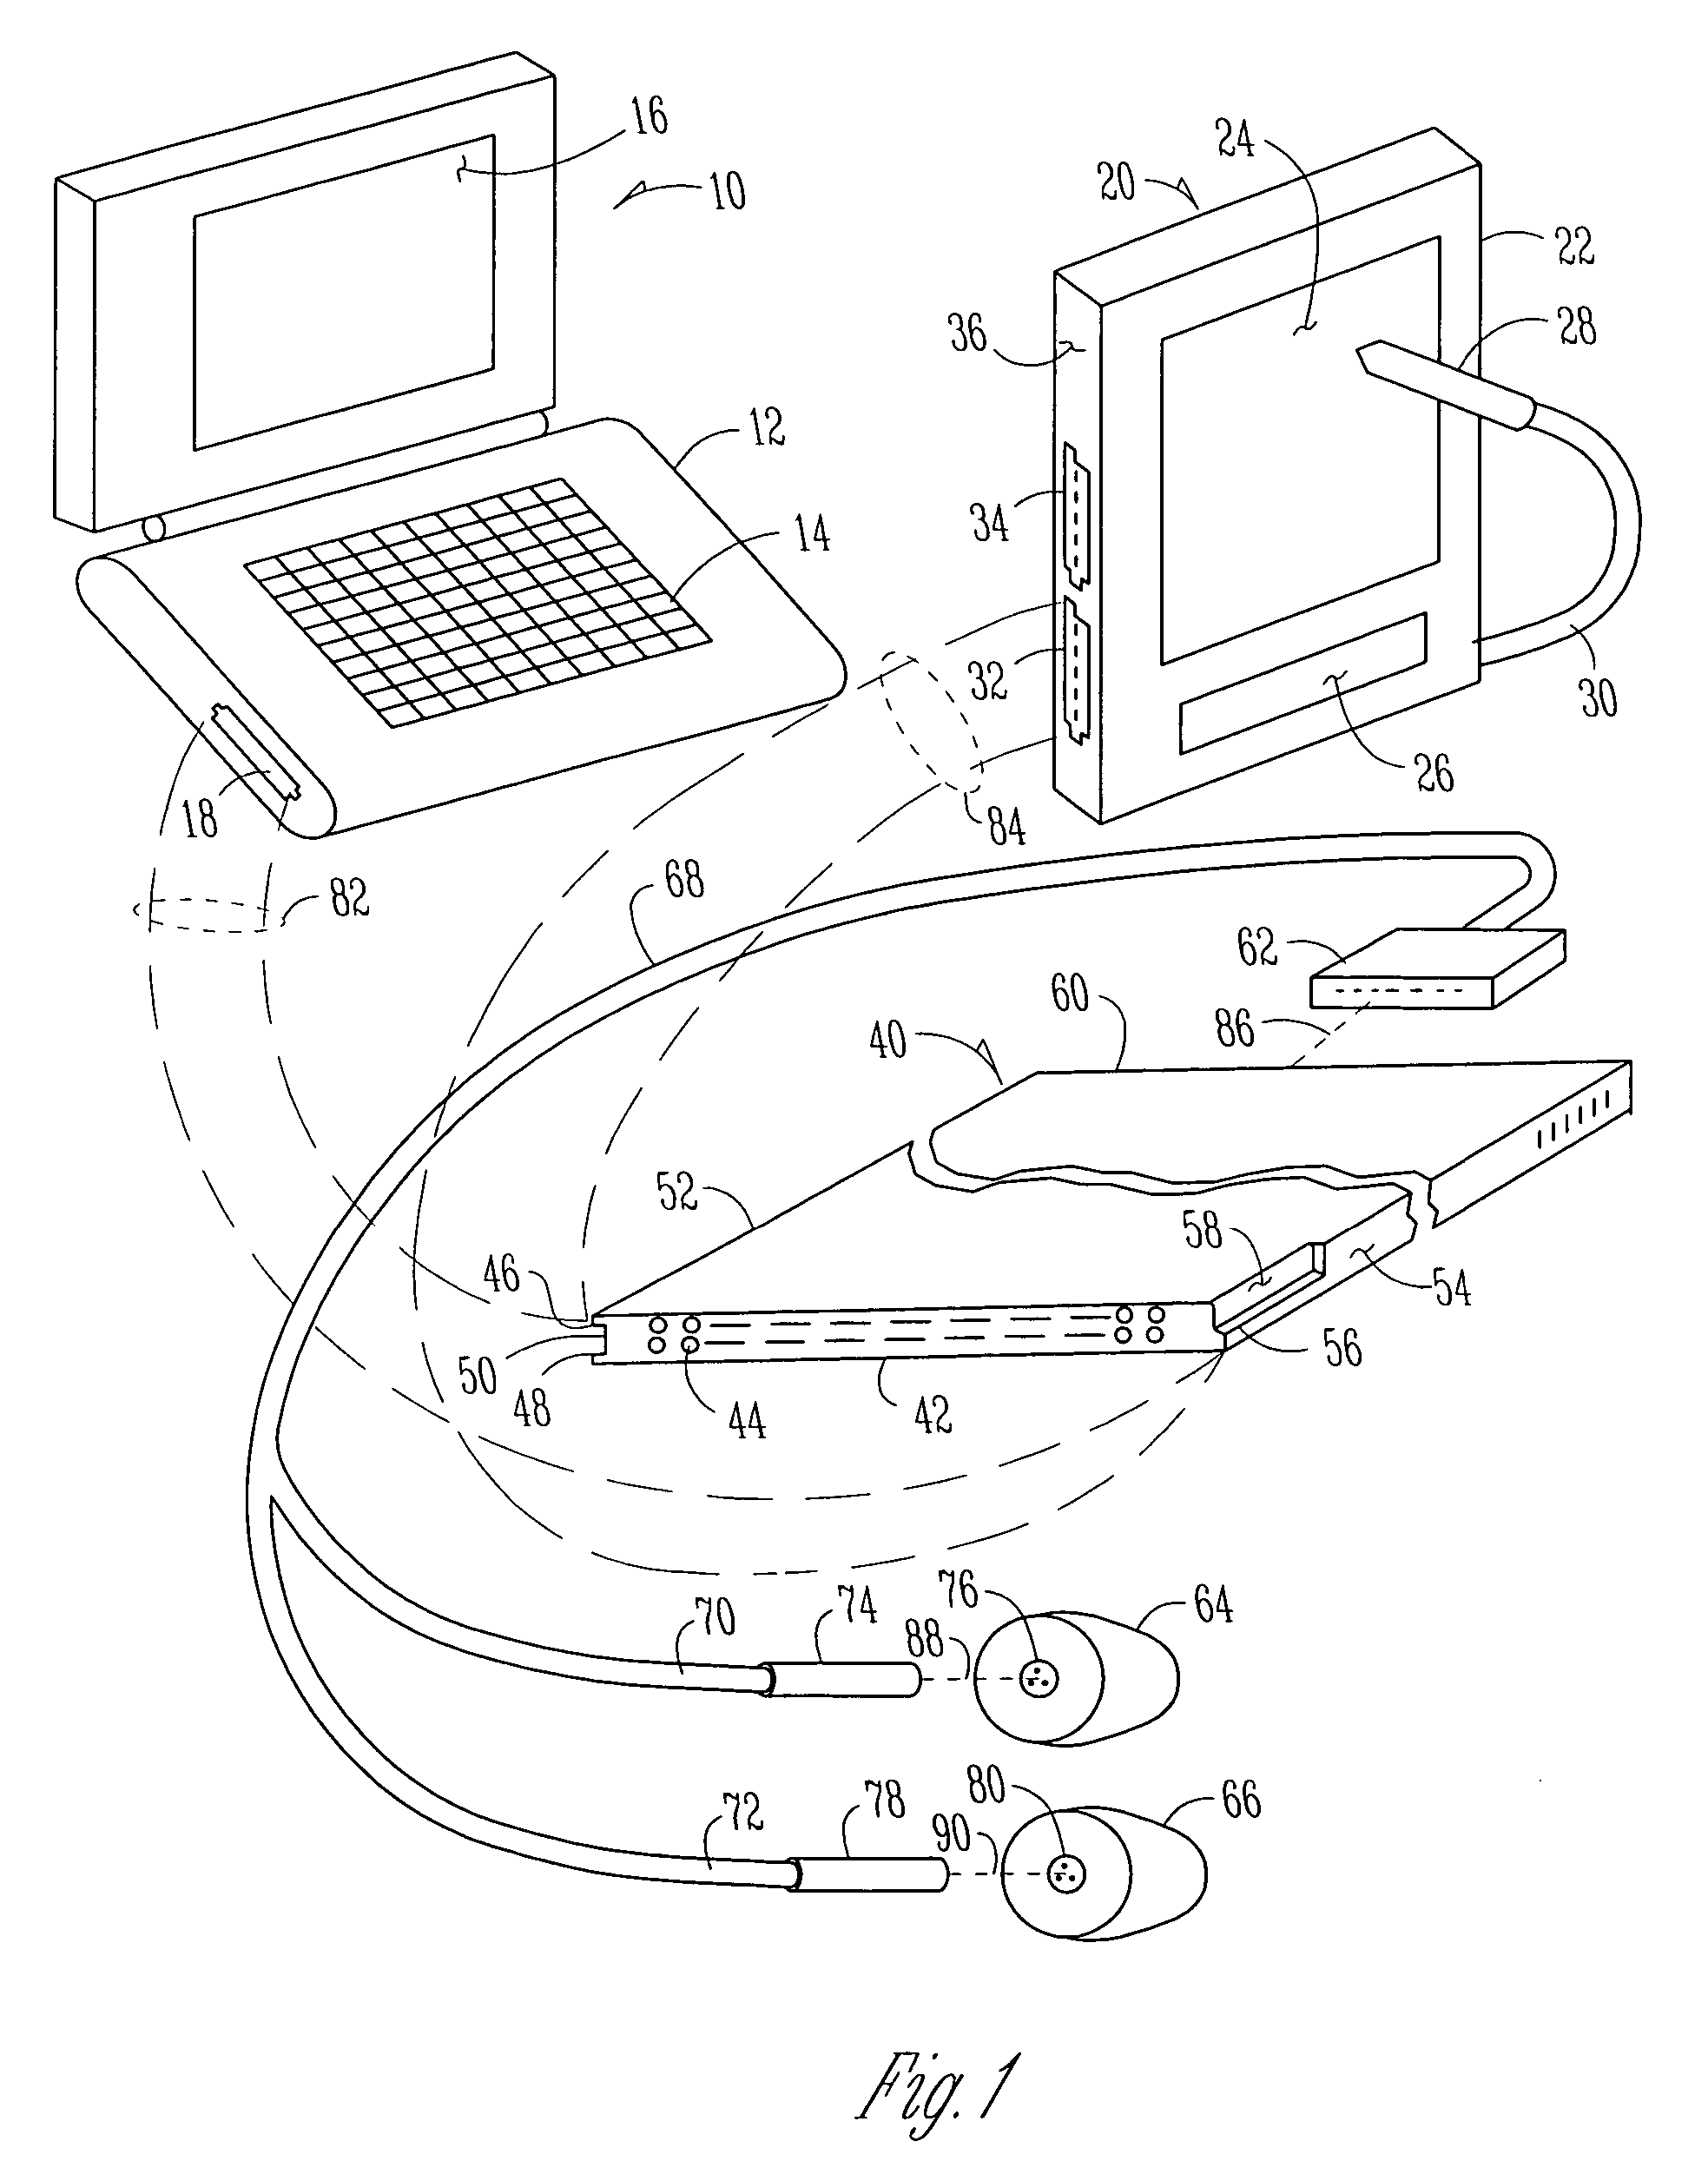 Portable system for programming hearing aids